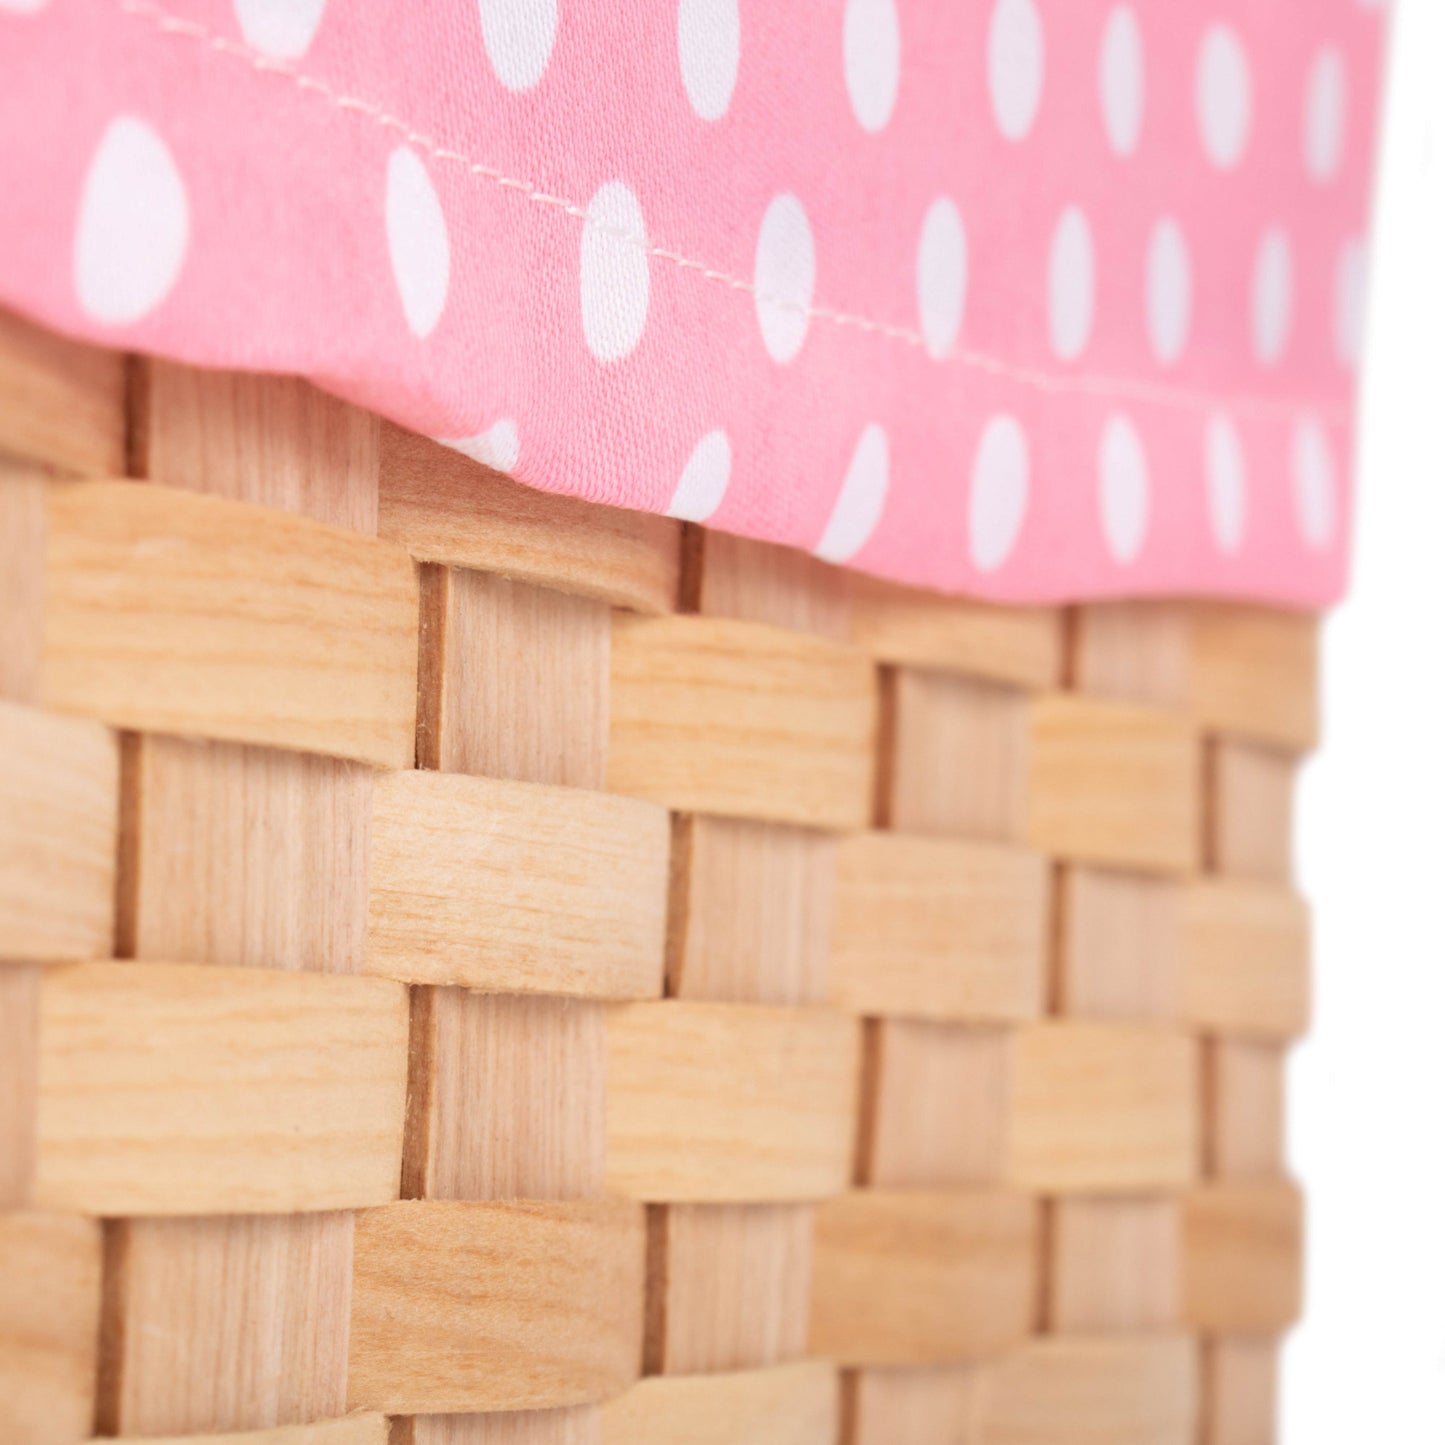 Chipwood Swing Handle Basket With Pink Lining